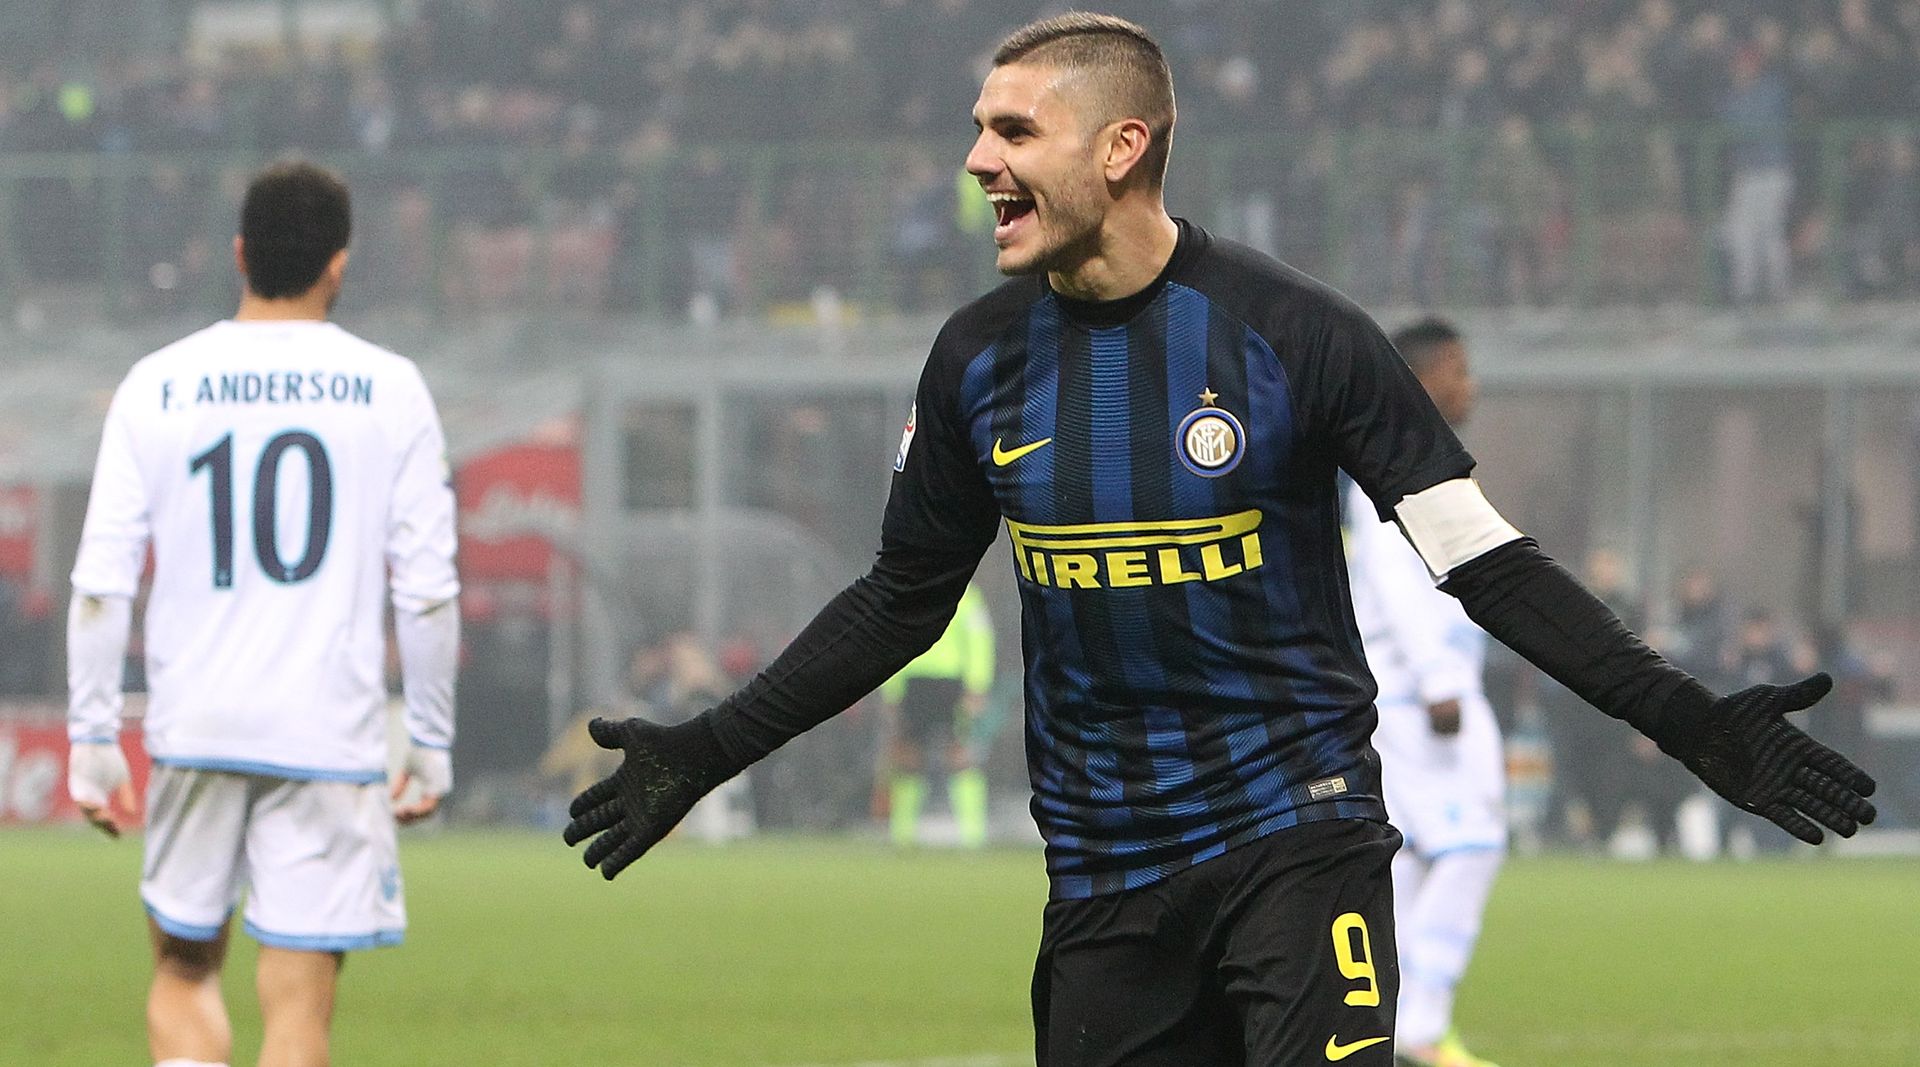 <p>                     Among the most prolific strikers in Europe at his peak, Mauro Icardi banged in 122 goals in 221 Serie A appearances from 2012 to 2019.                   </p>                                      <p>                     The vast majority of that total came in the colours of Inter Milan, who the Argentine – recipient of the <em>Capocannoniere</em> for the 2014/15 and 2017/18 seasons – joined from Sampdoria in 2013.                   </p>